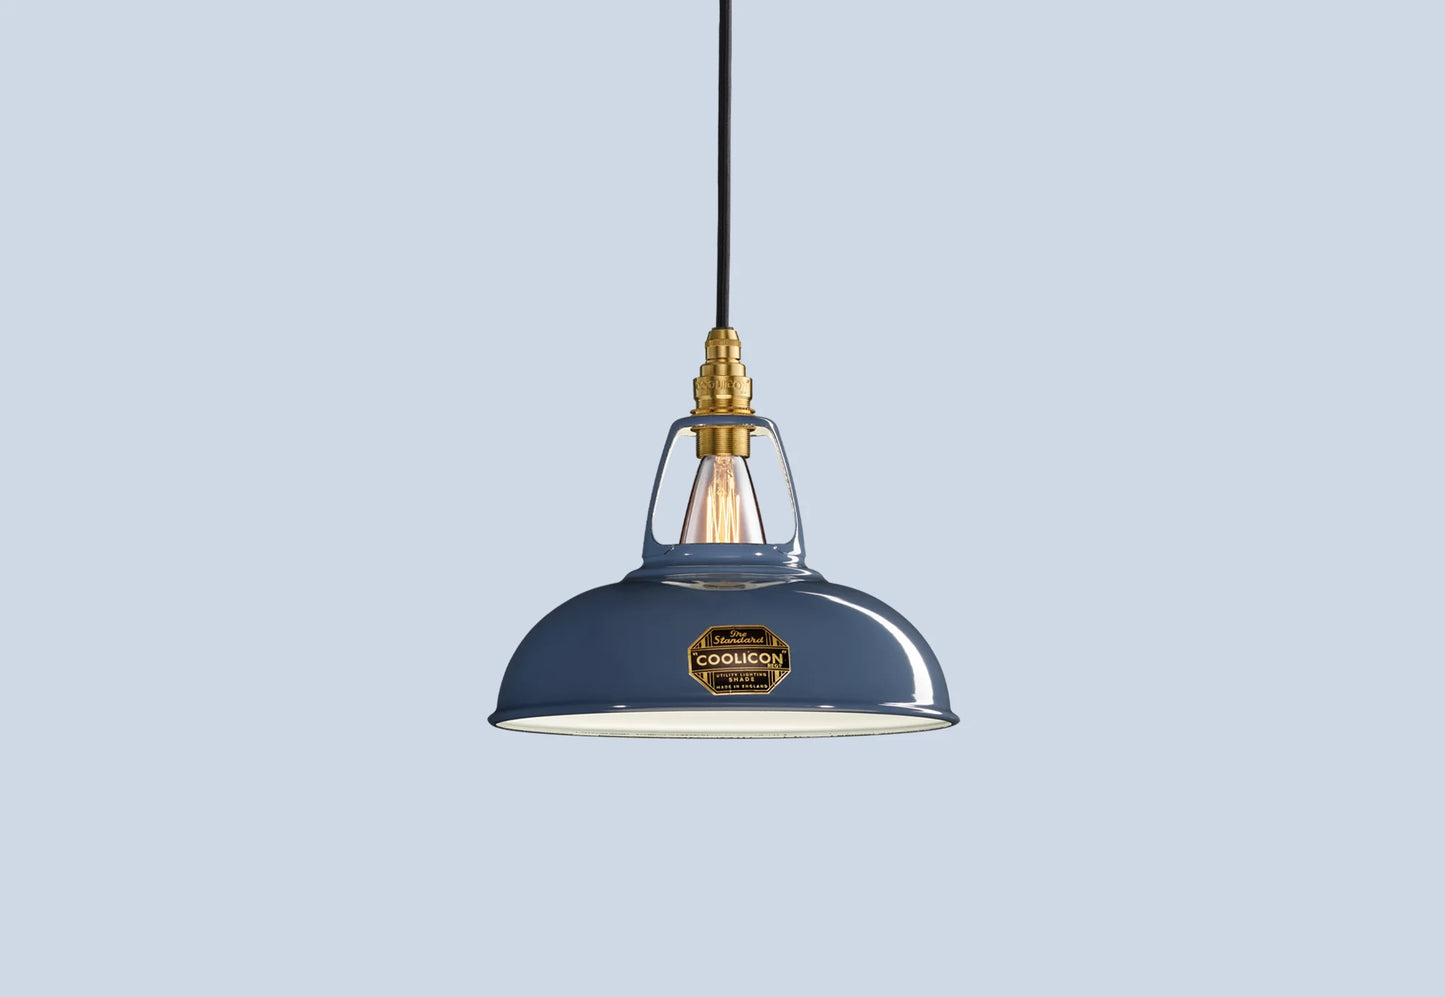 Selvedge blue Coolicon lampshade with a Signature Brass pendant set over a light blue background